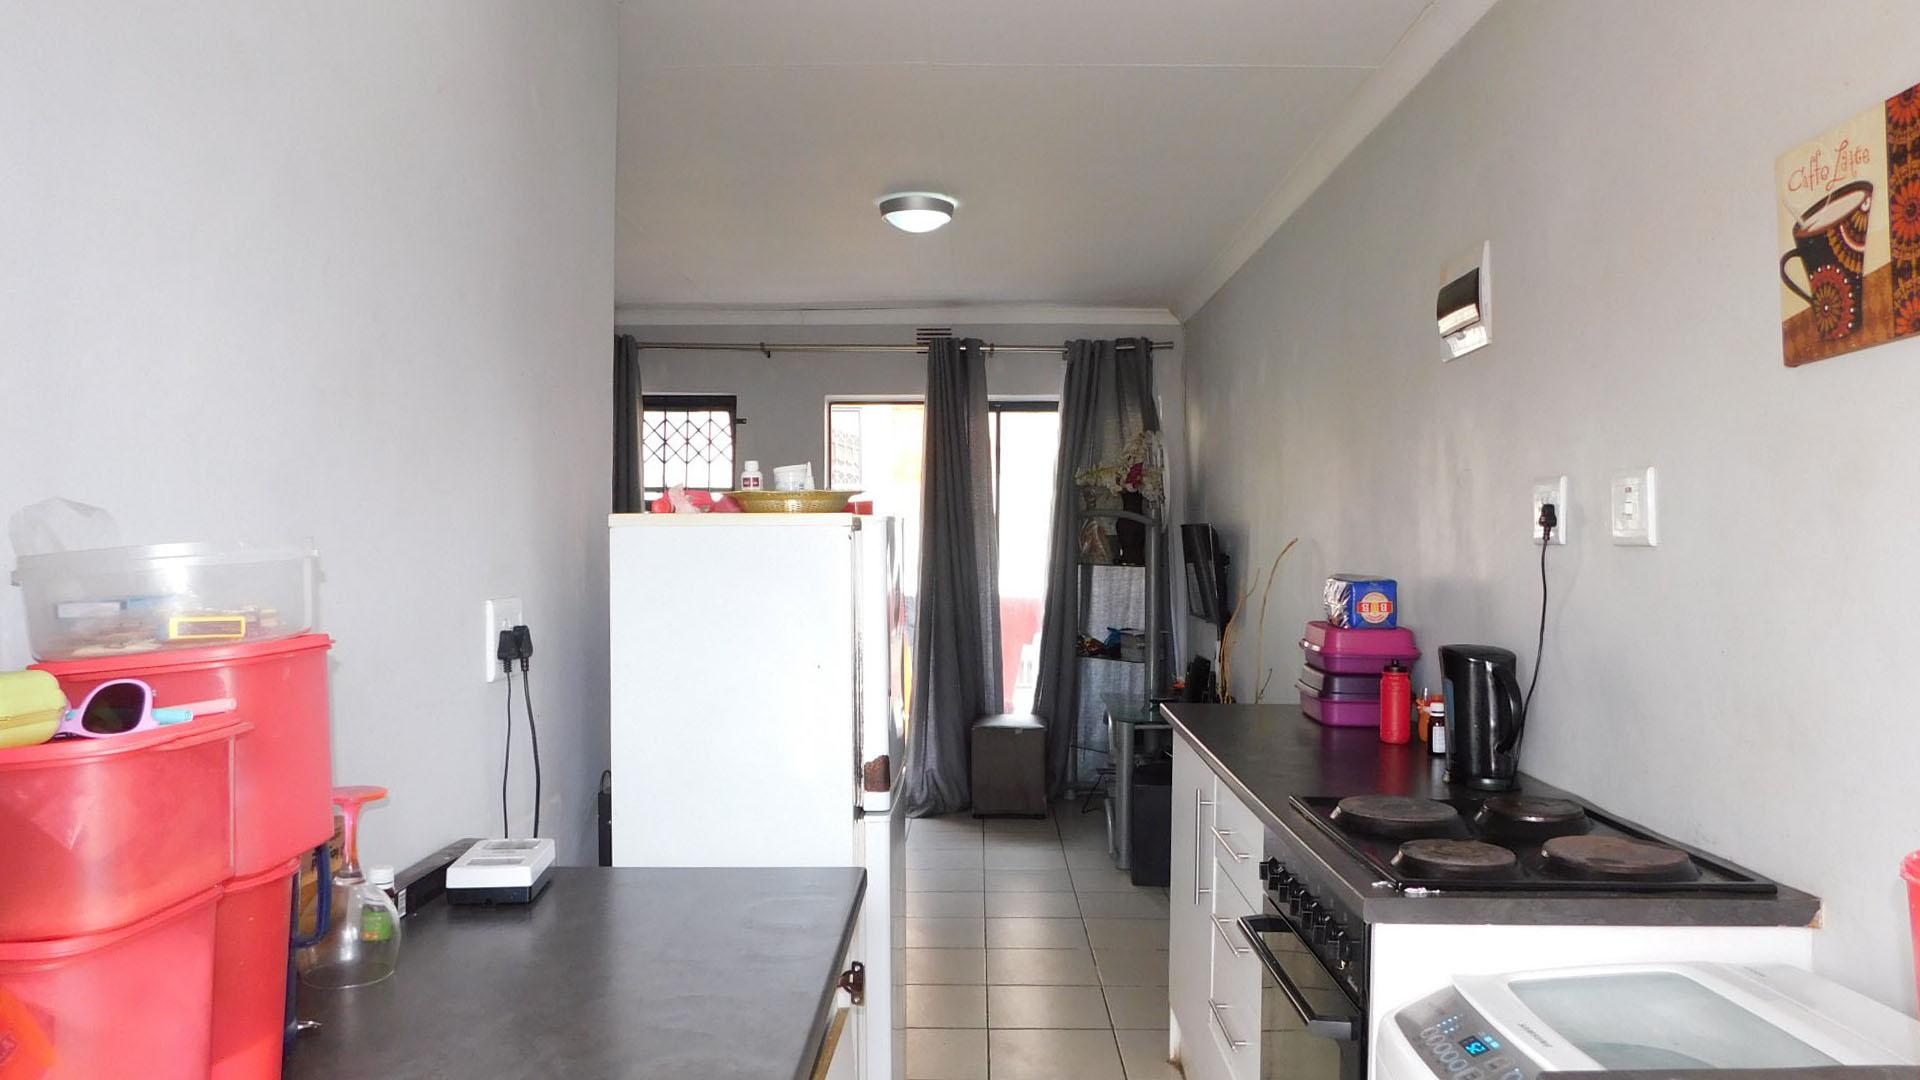 Kitchen - 7 square meters of property in Newlands East